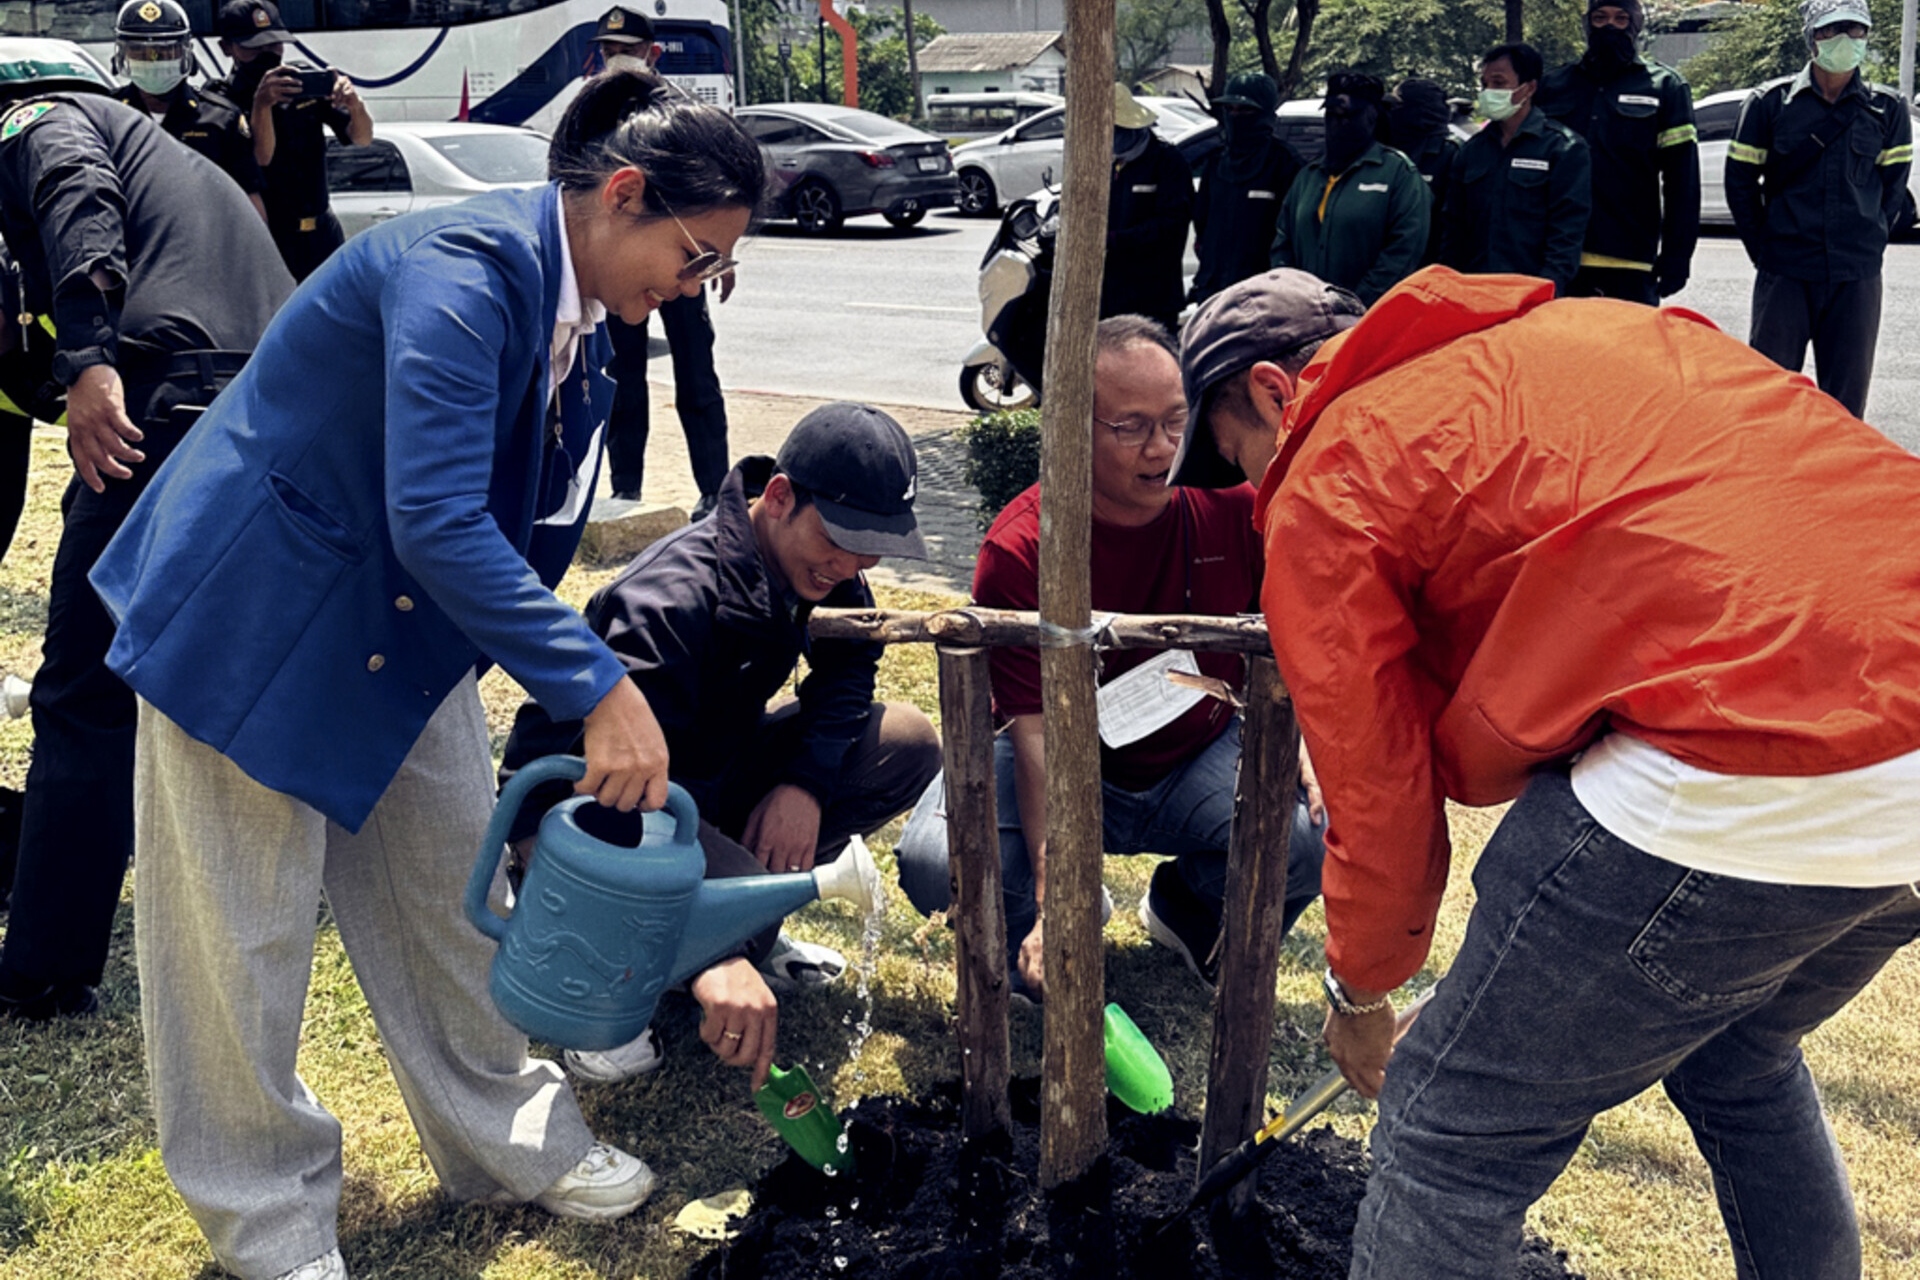 ZEISS employees in Thailand planting trees on earth day